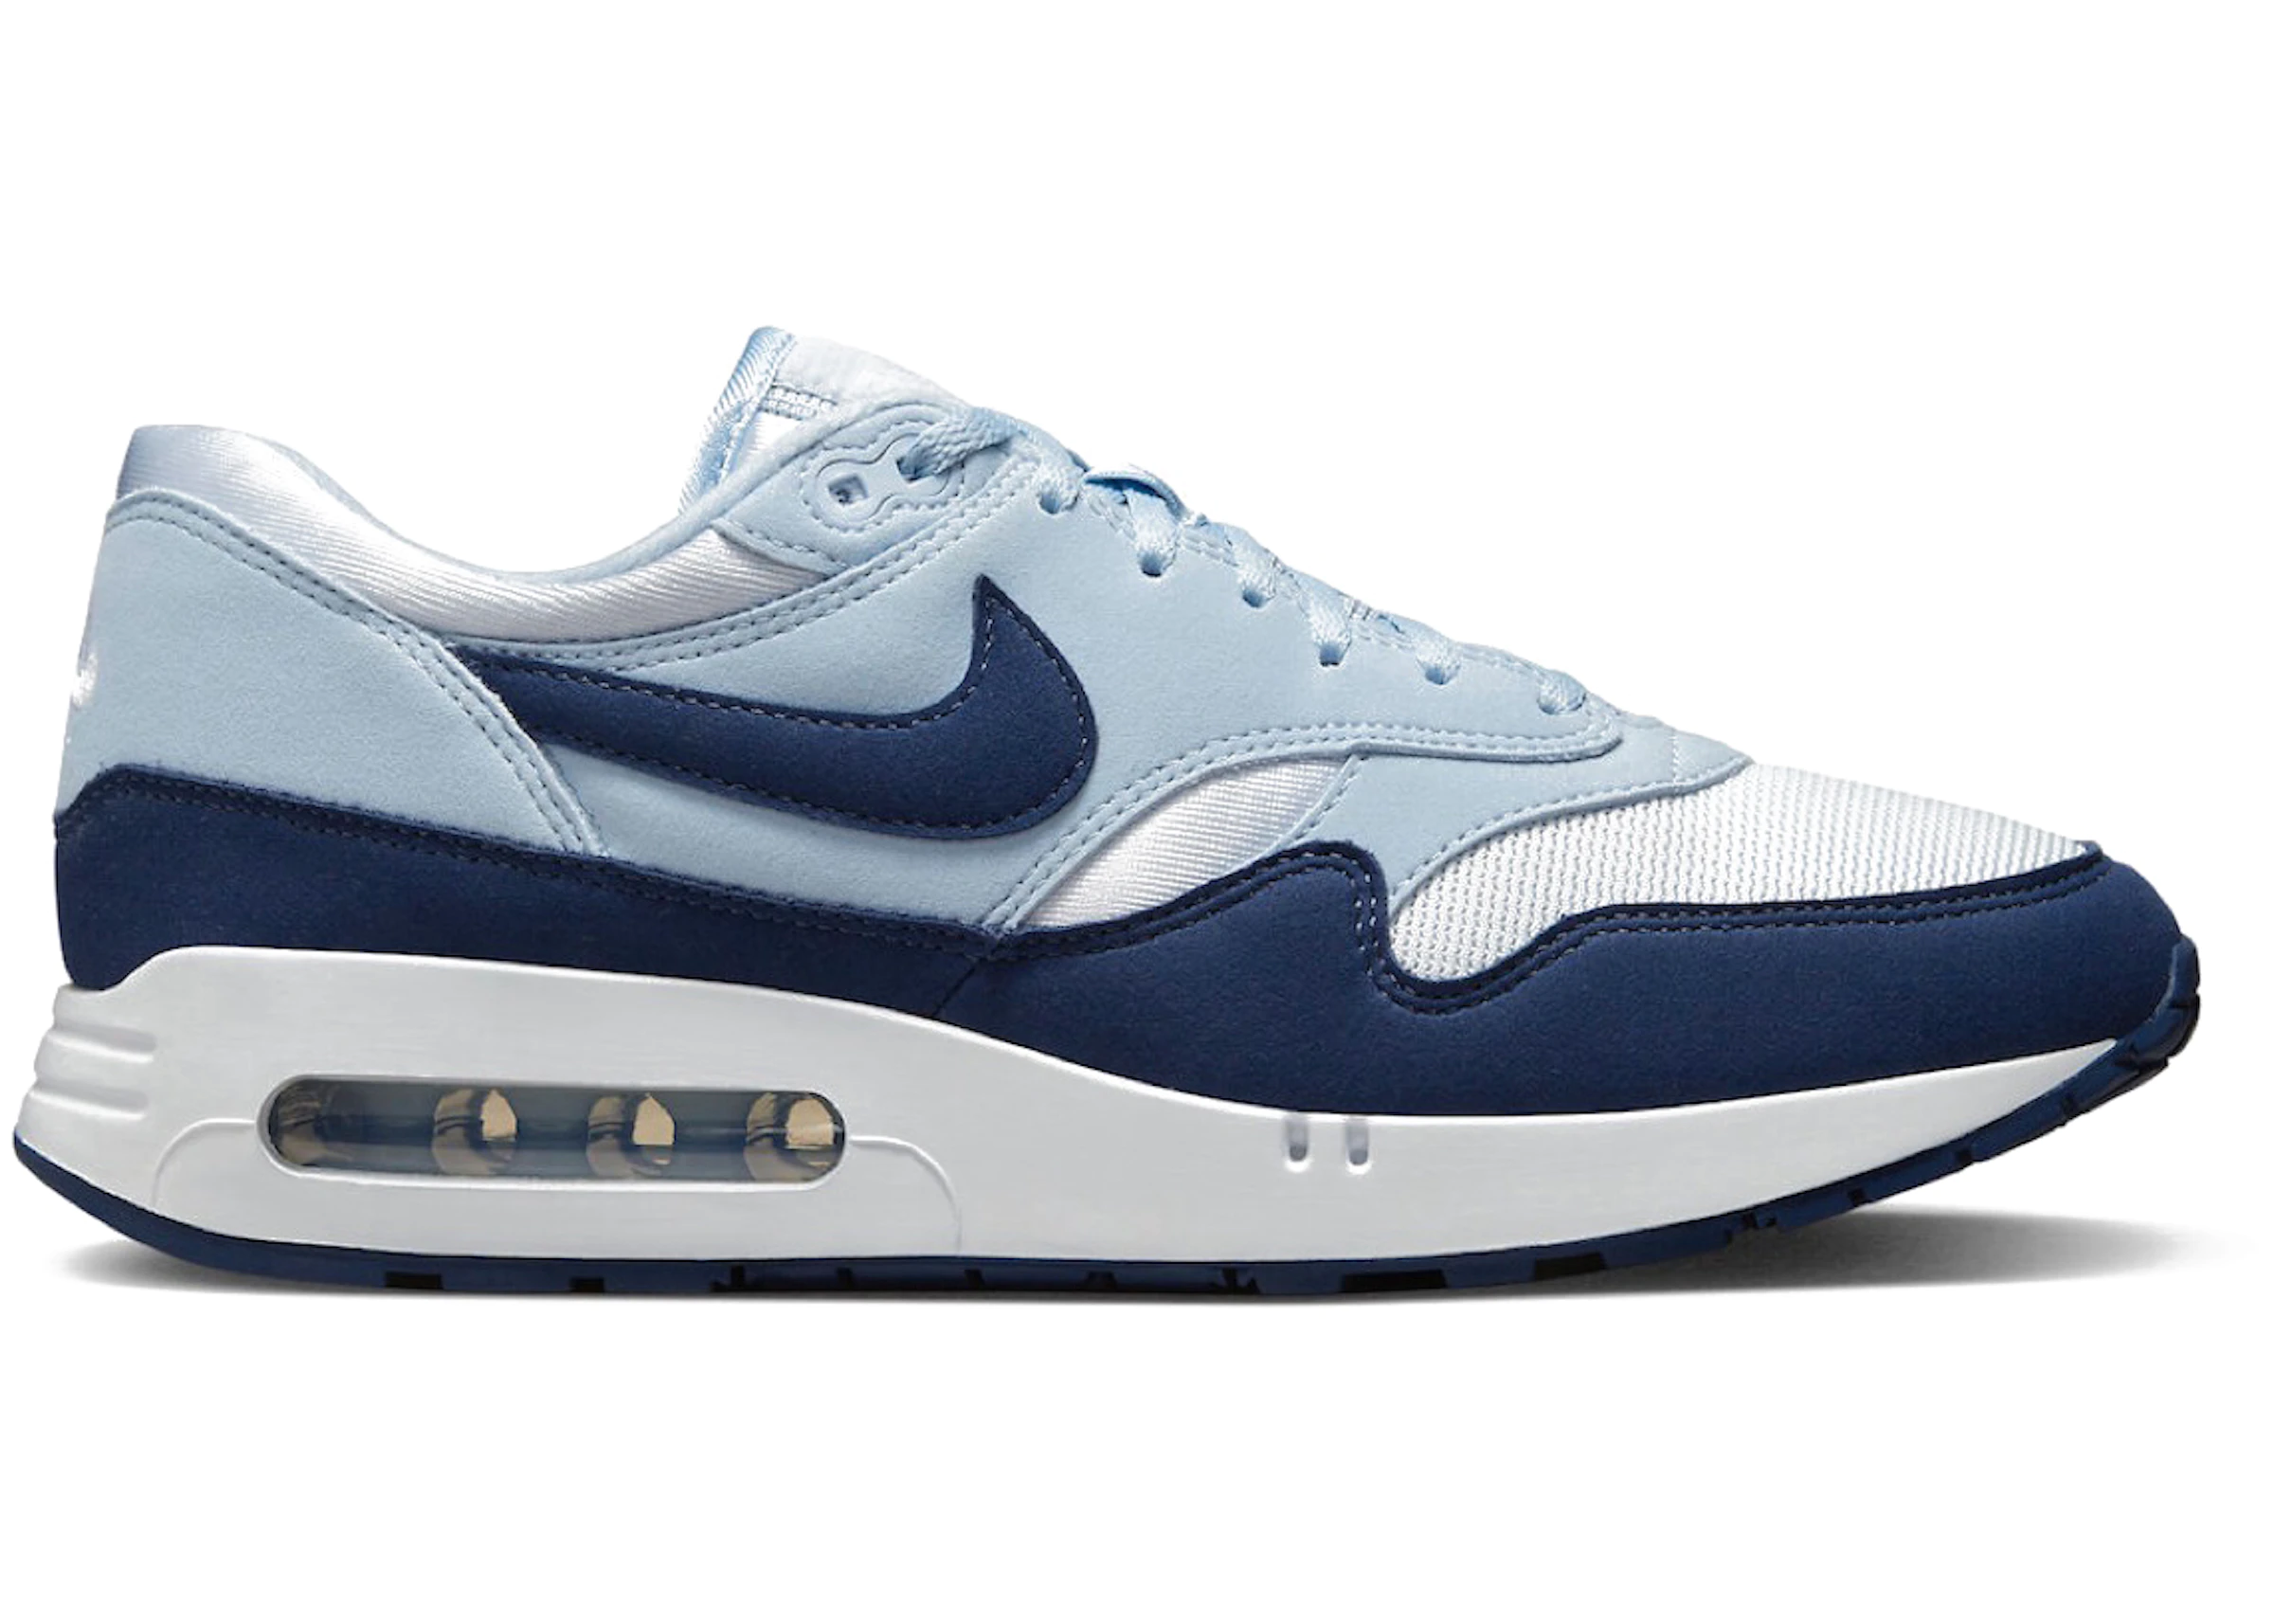 Cataract Punt temperen Buy Nike Air Max 1 Shoes & New Sneakers - StockX